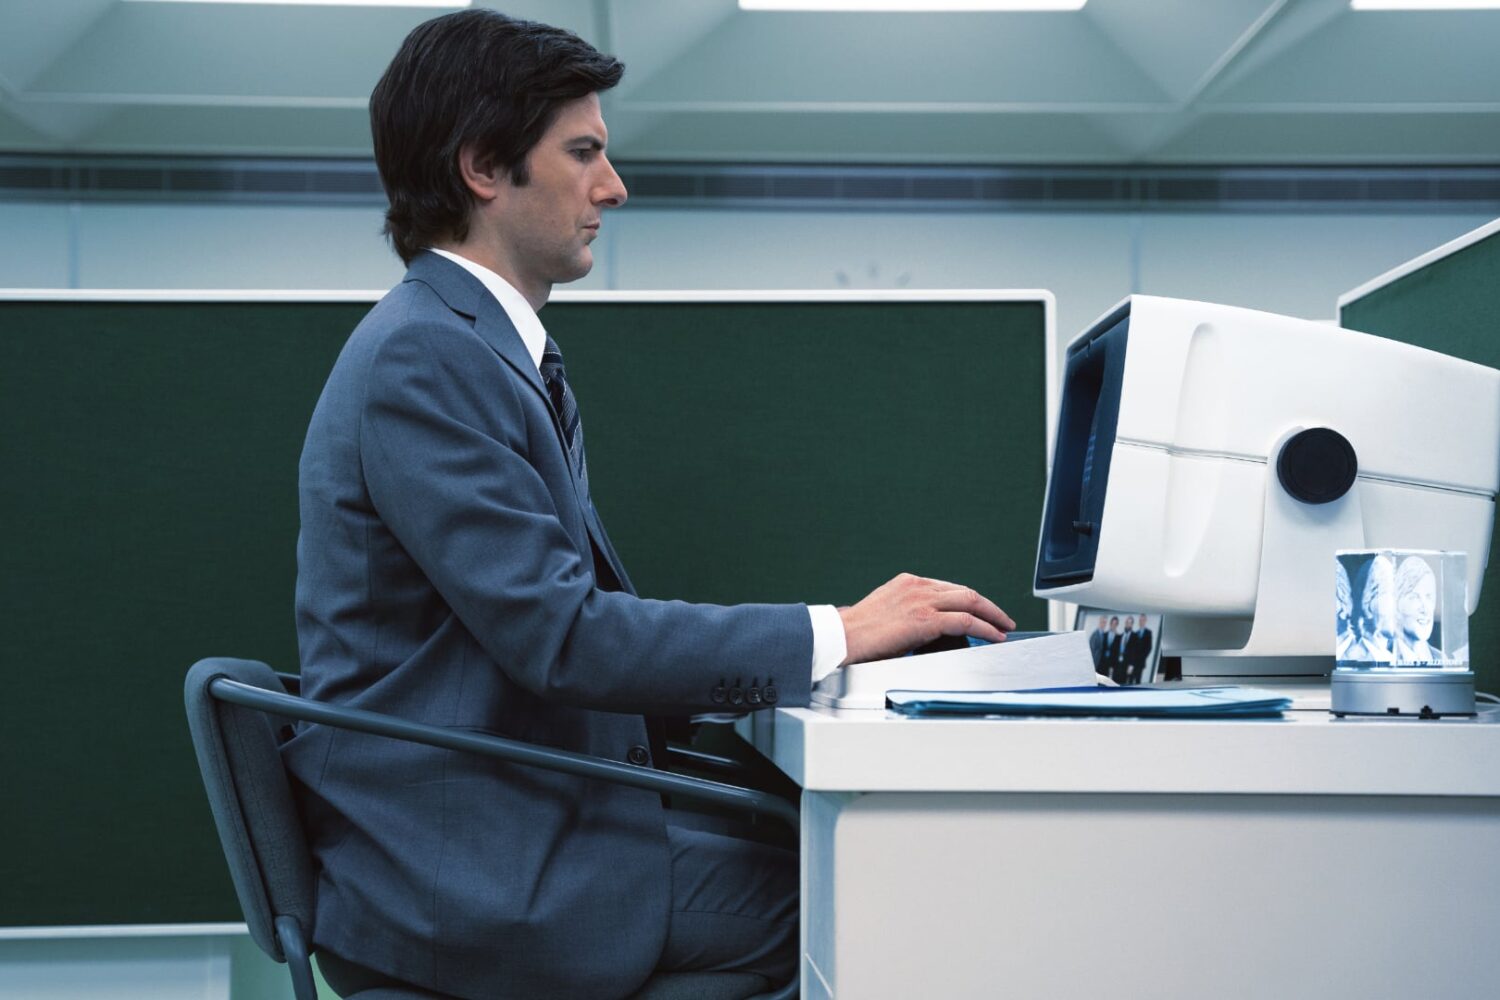 Mark Scout sitting in front of his computer at Lumon Industries in "Severance"